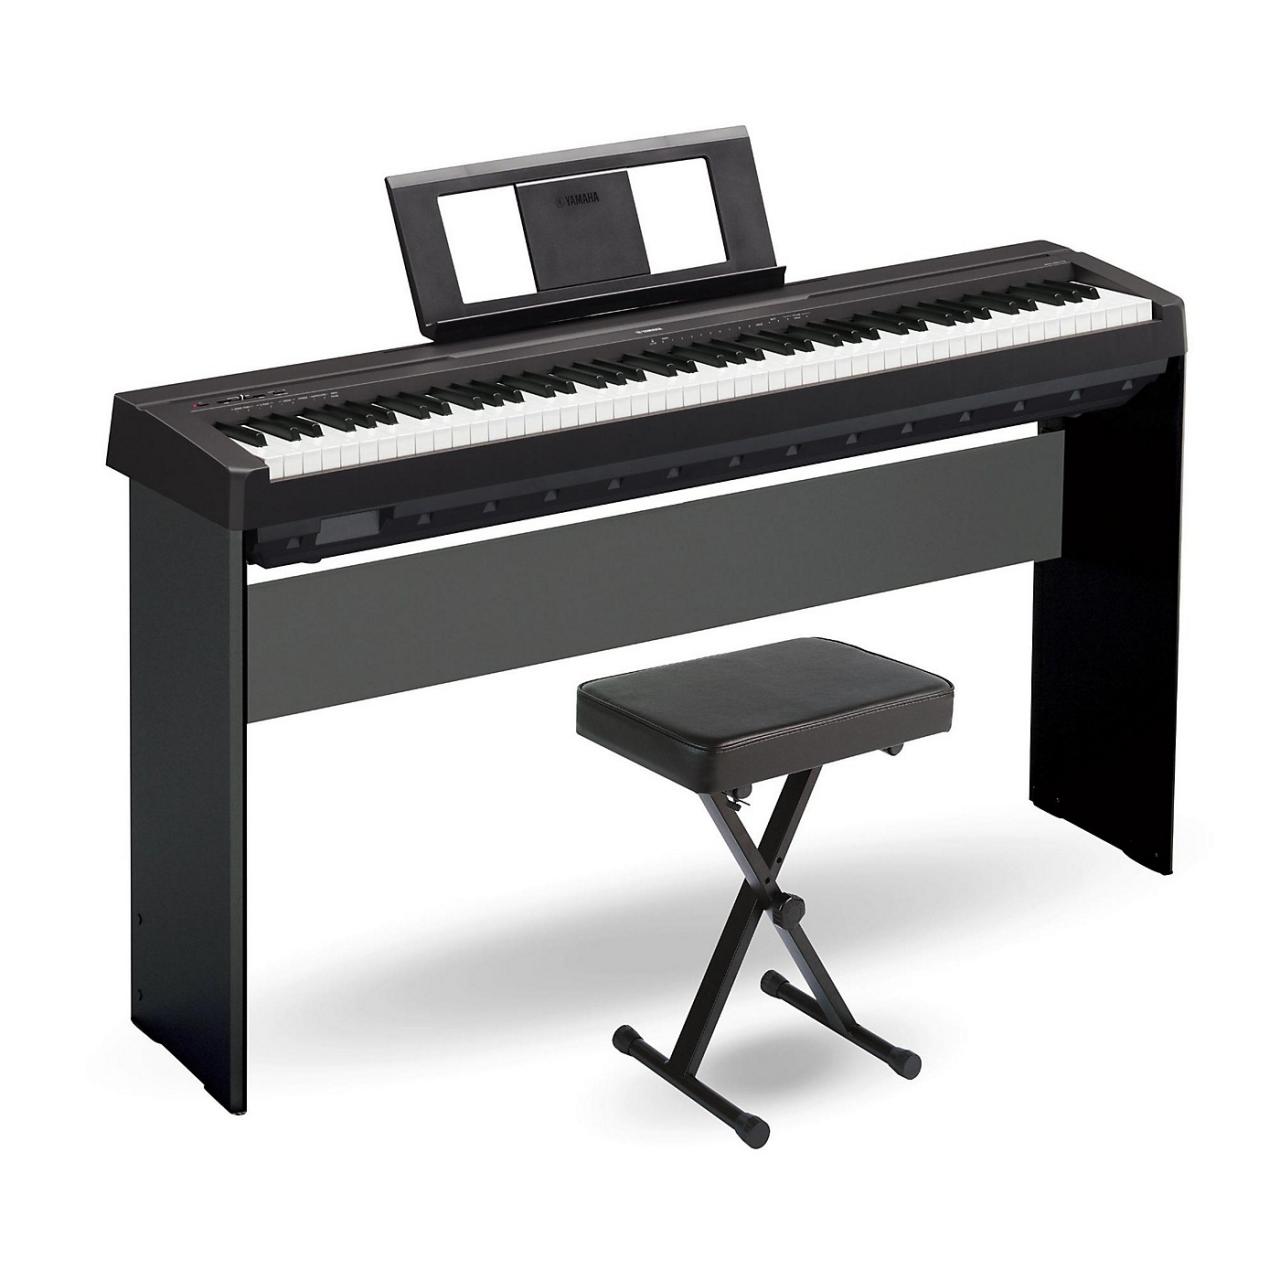 Yamaha P-45: An 88-Key Weighted Action Digital Piano in Black